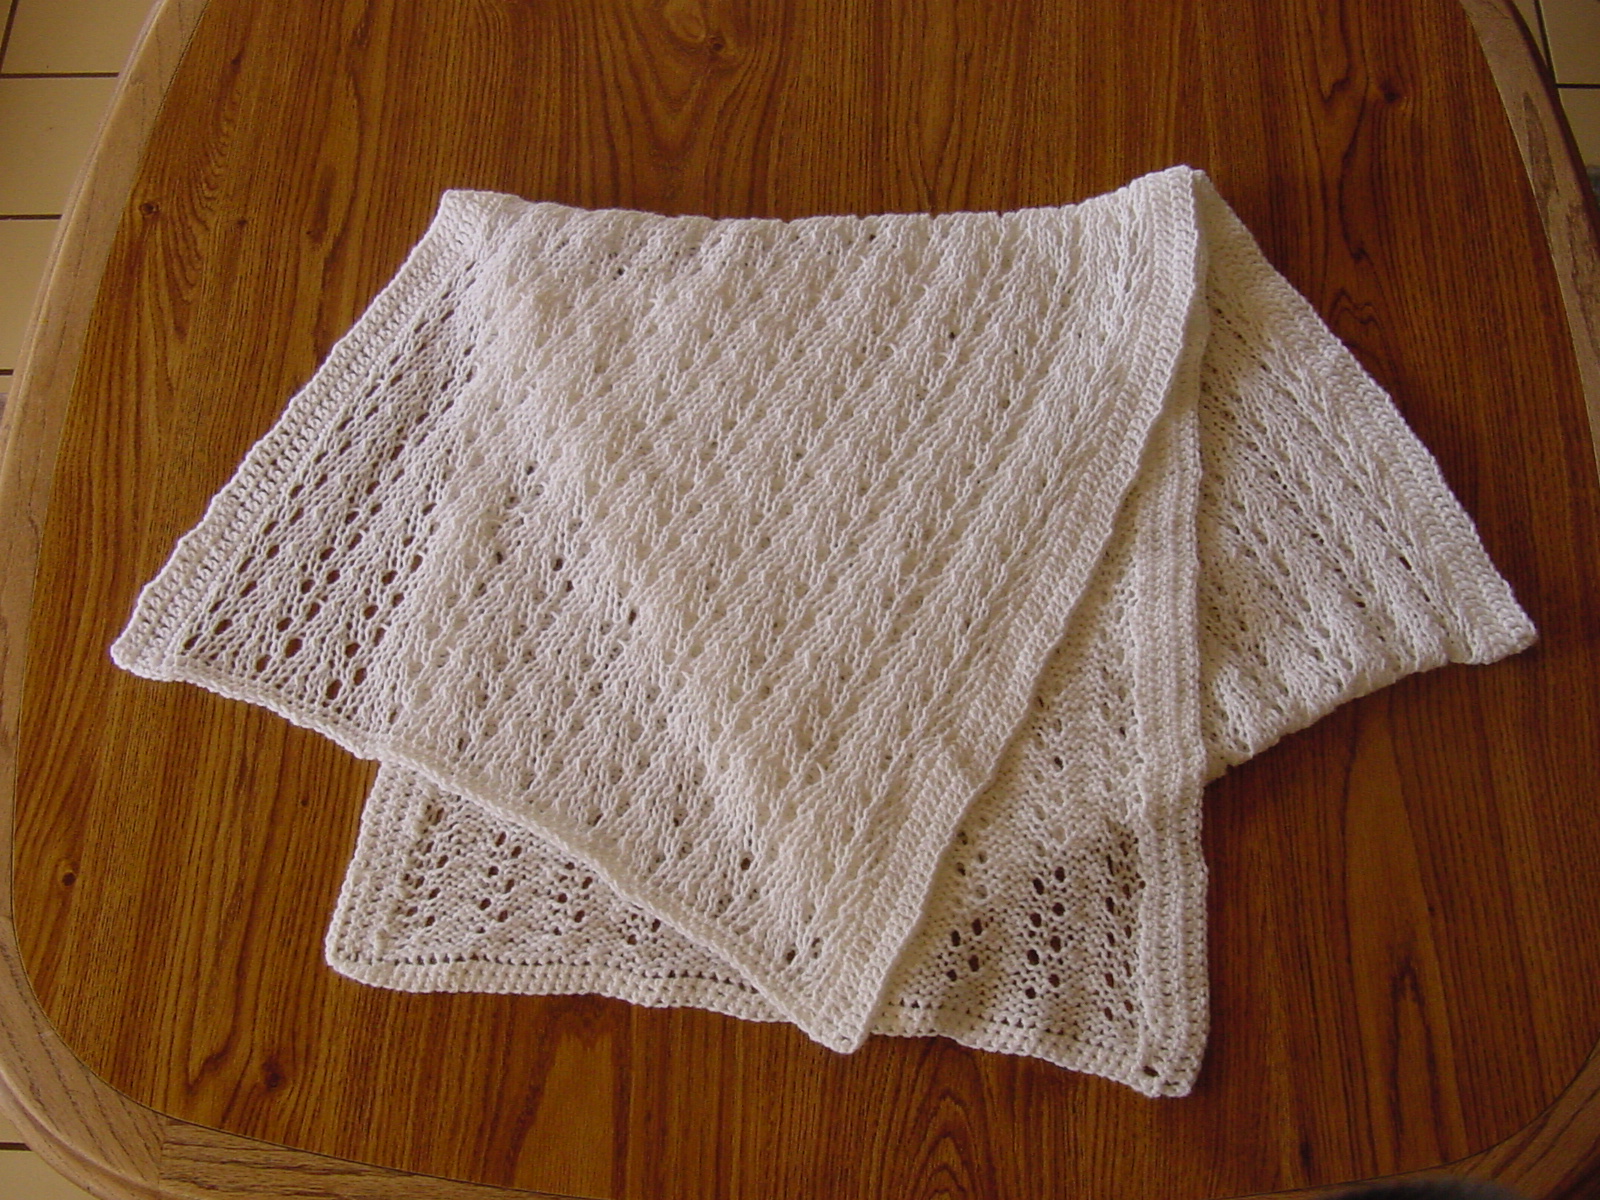 Completed Lace Rib Prayer Shawl